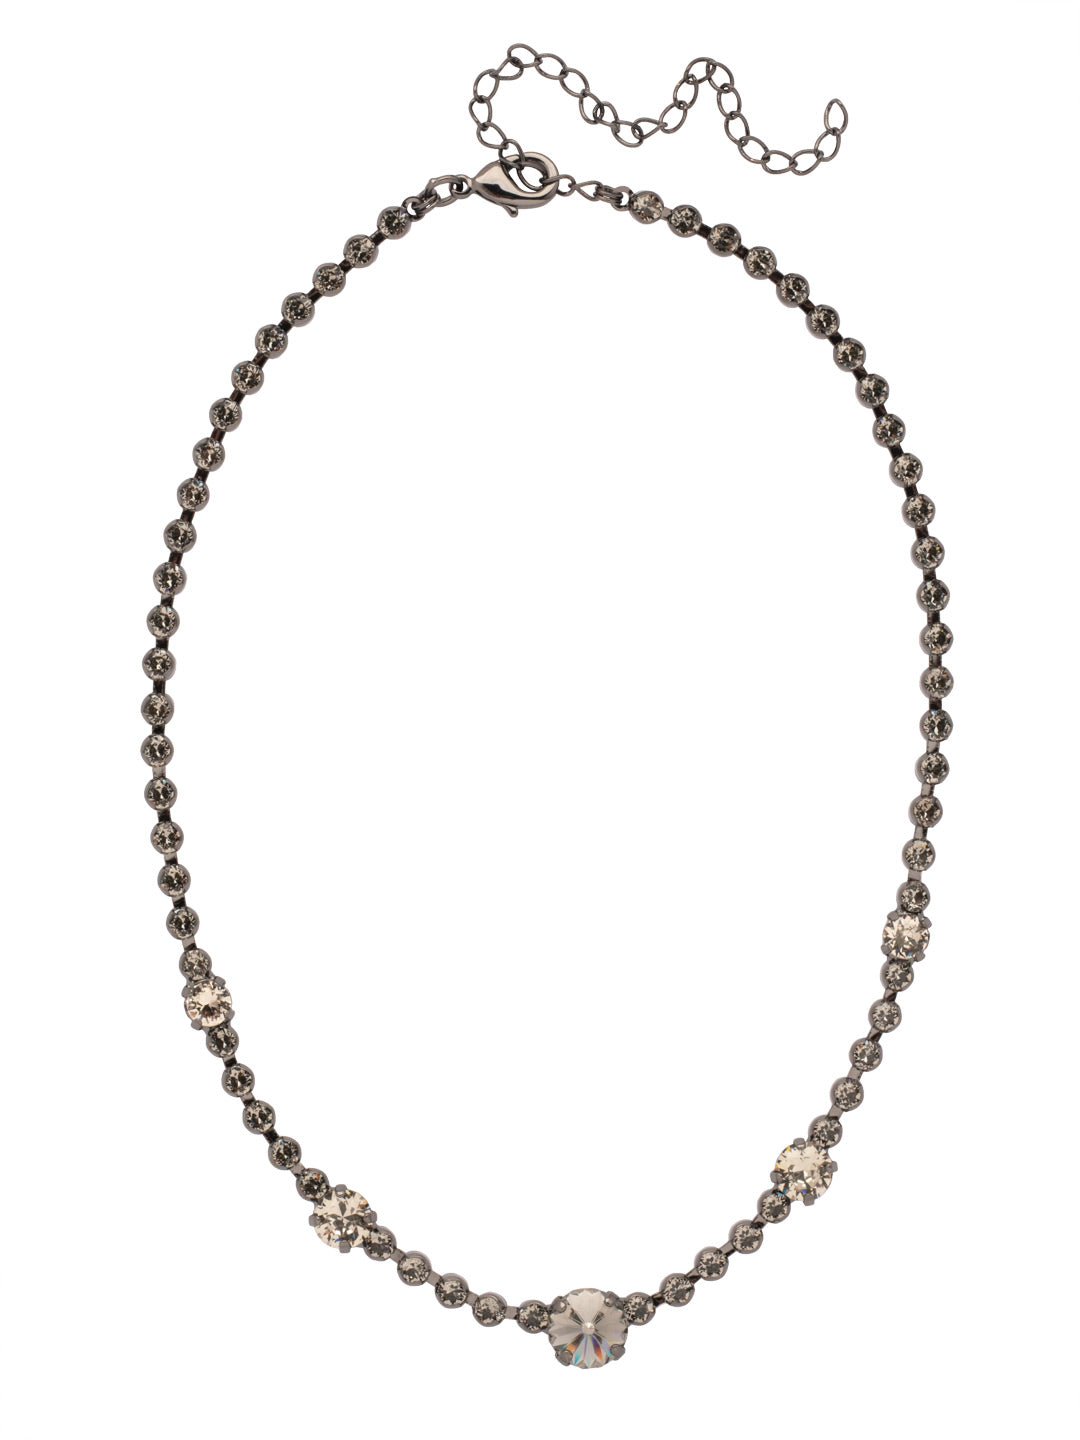 Hazel Tennis Necklace - NFL9GMBD - <p>The Hazel Tennis Necklace features an adjustable crystal embellished chain with round and rivoli cut accent crystals, secured with a lobster claw clasp. From Sorrelli's Black Diamond collection in our Gun Metal finish.</p>